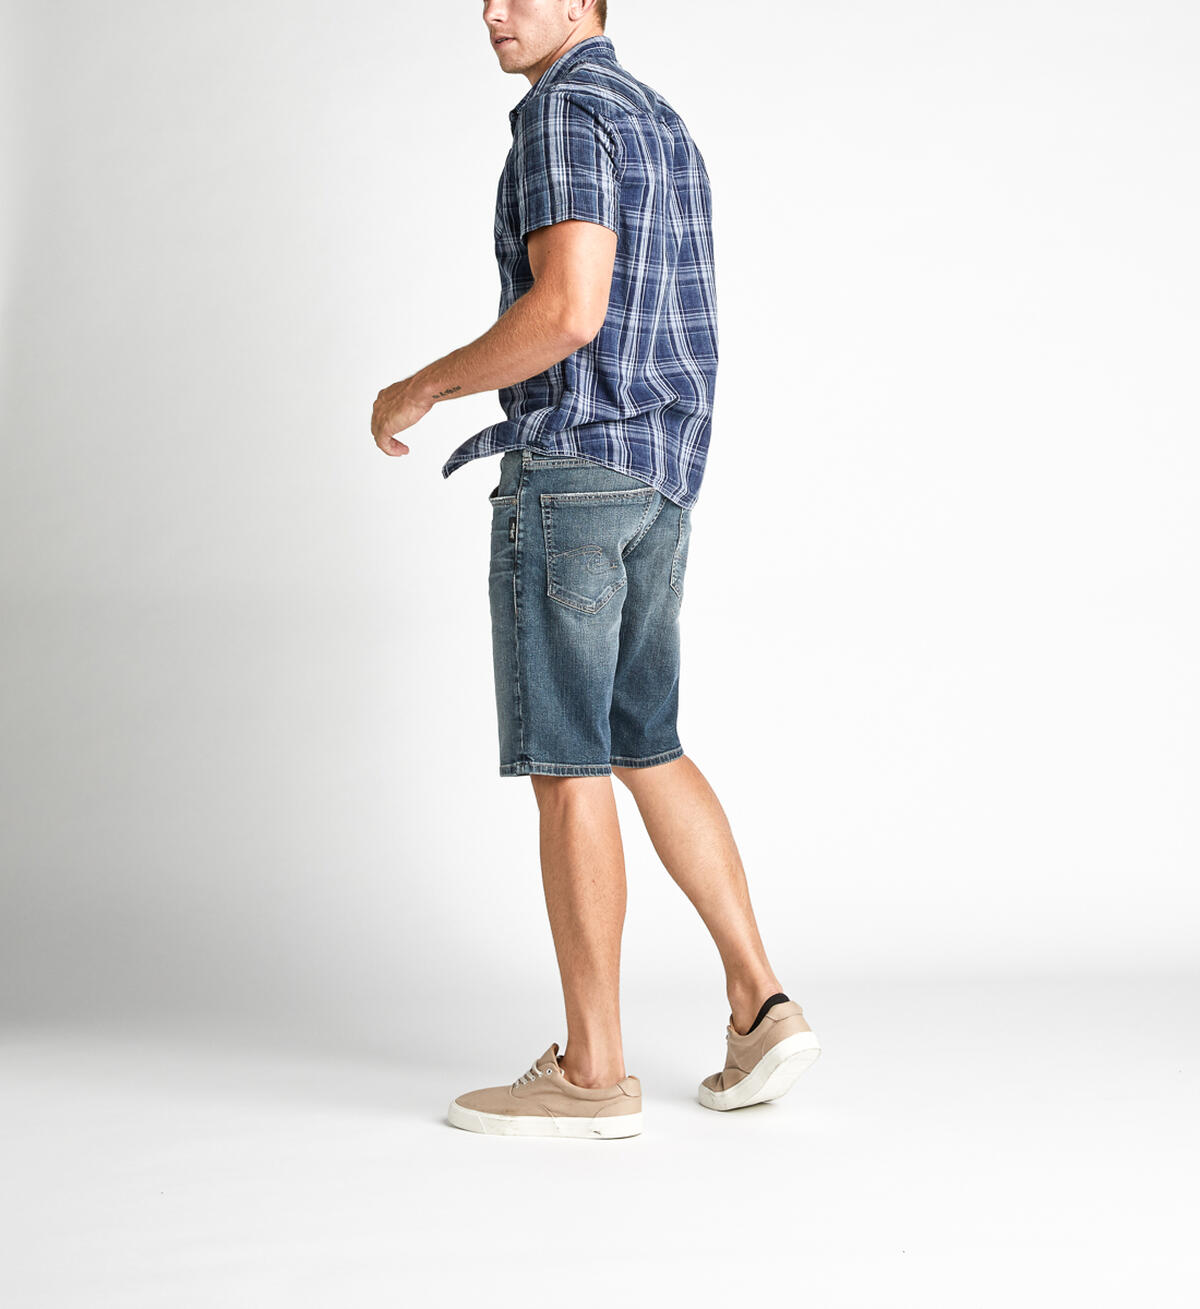 Colter Short-Sleeve Classic Shirt, , hi-res image number 3